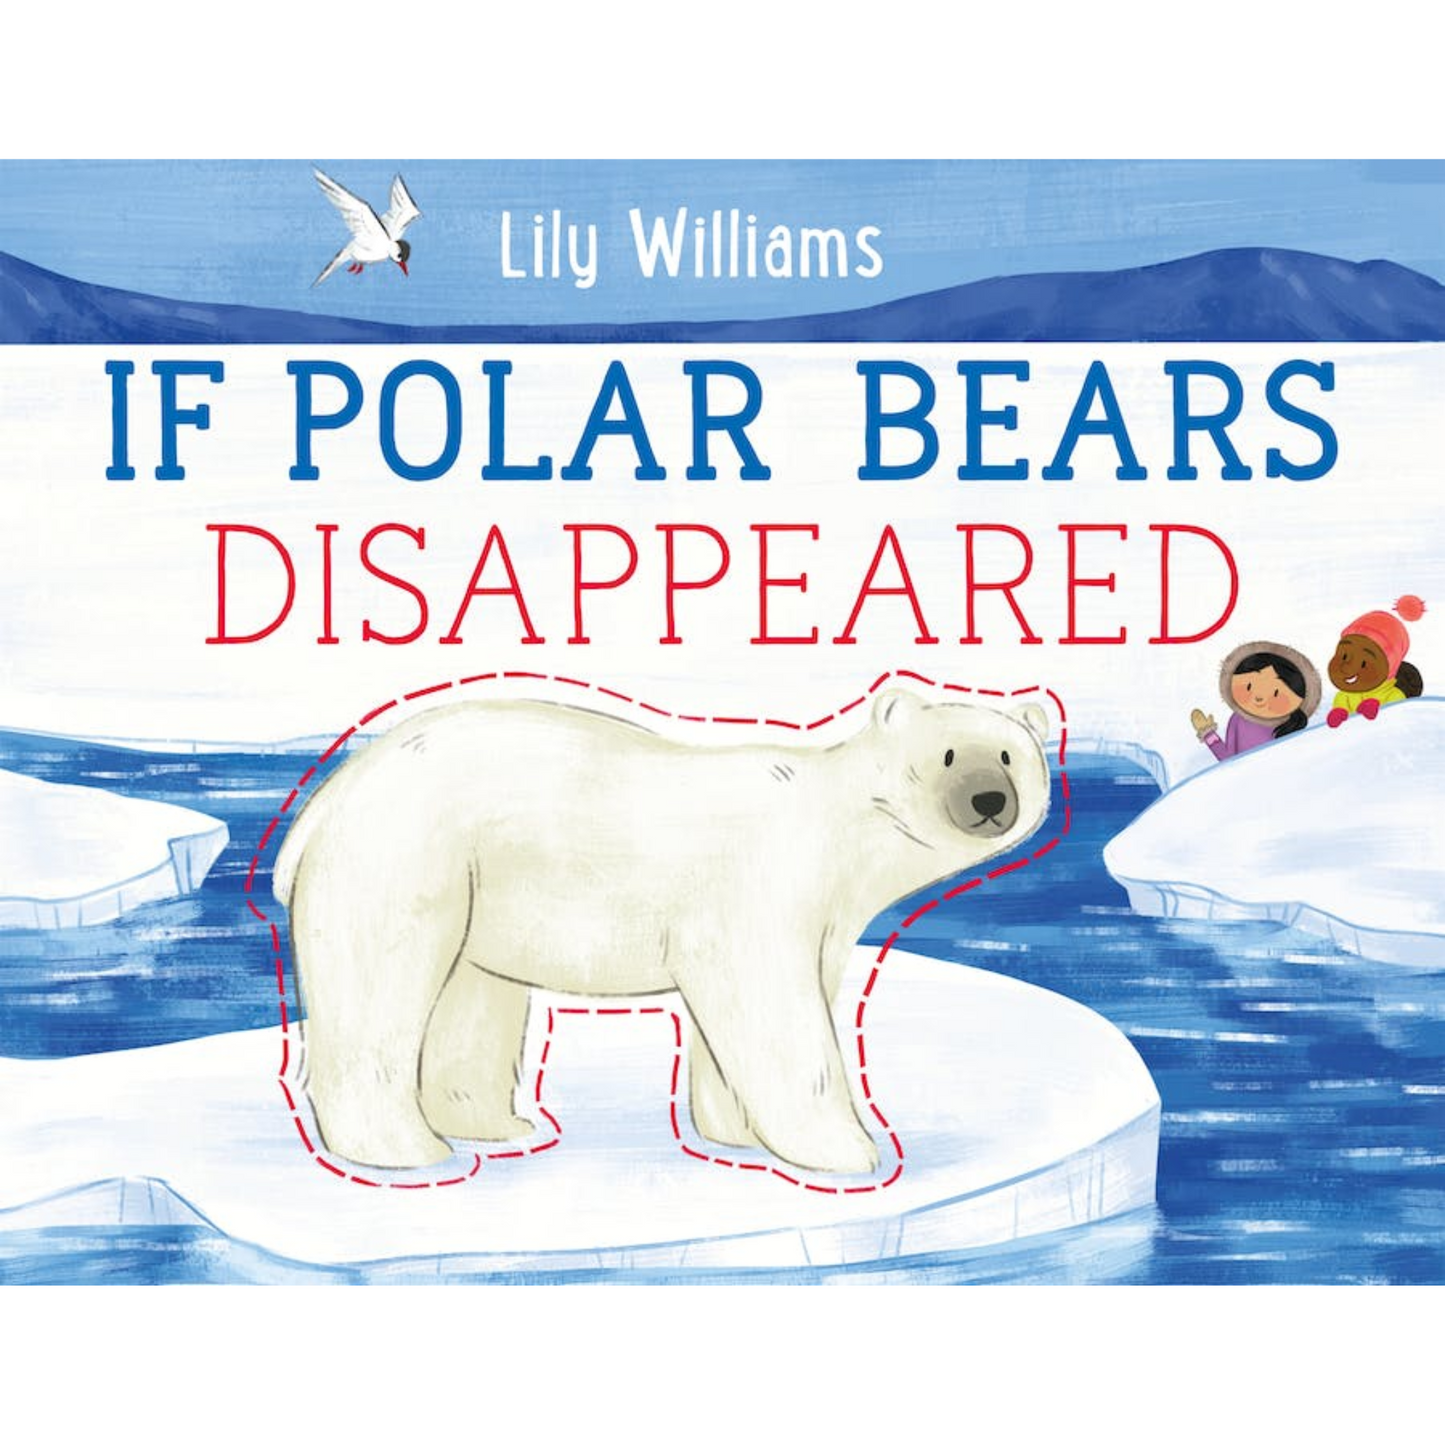 If Polar Bears Disappeared by Lily Williams